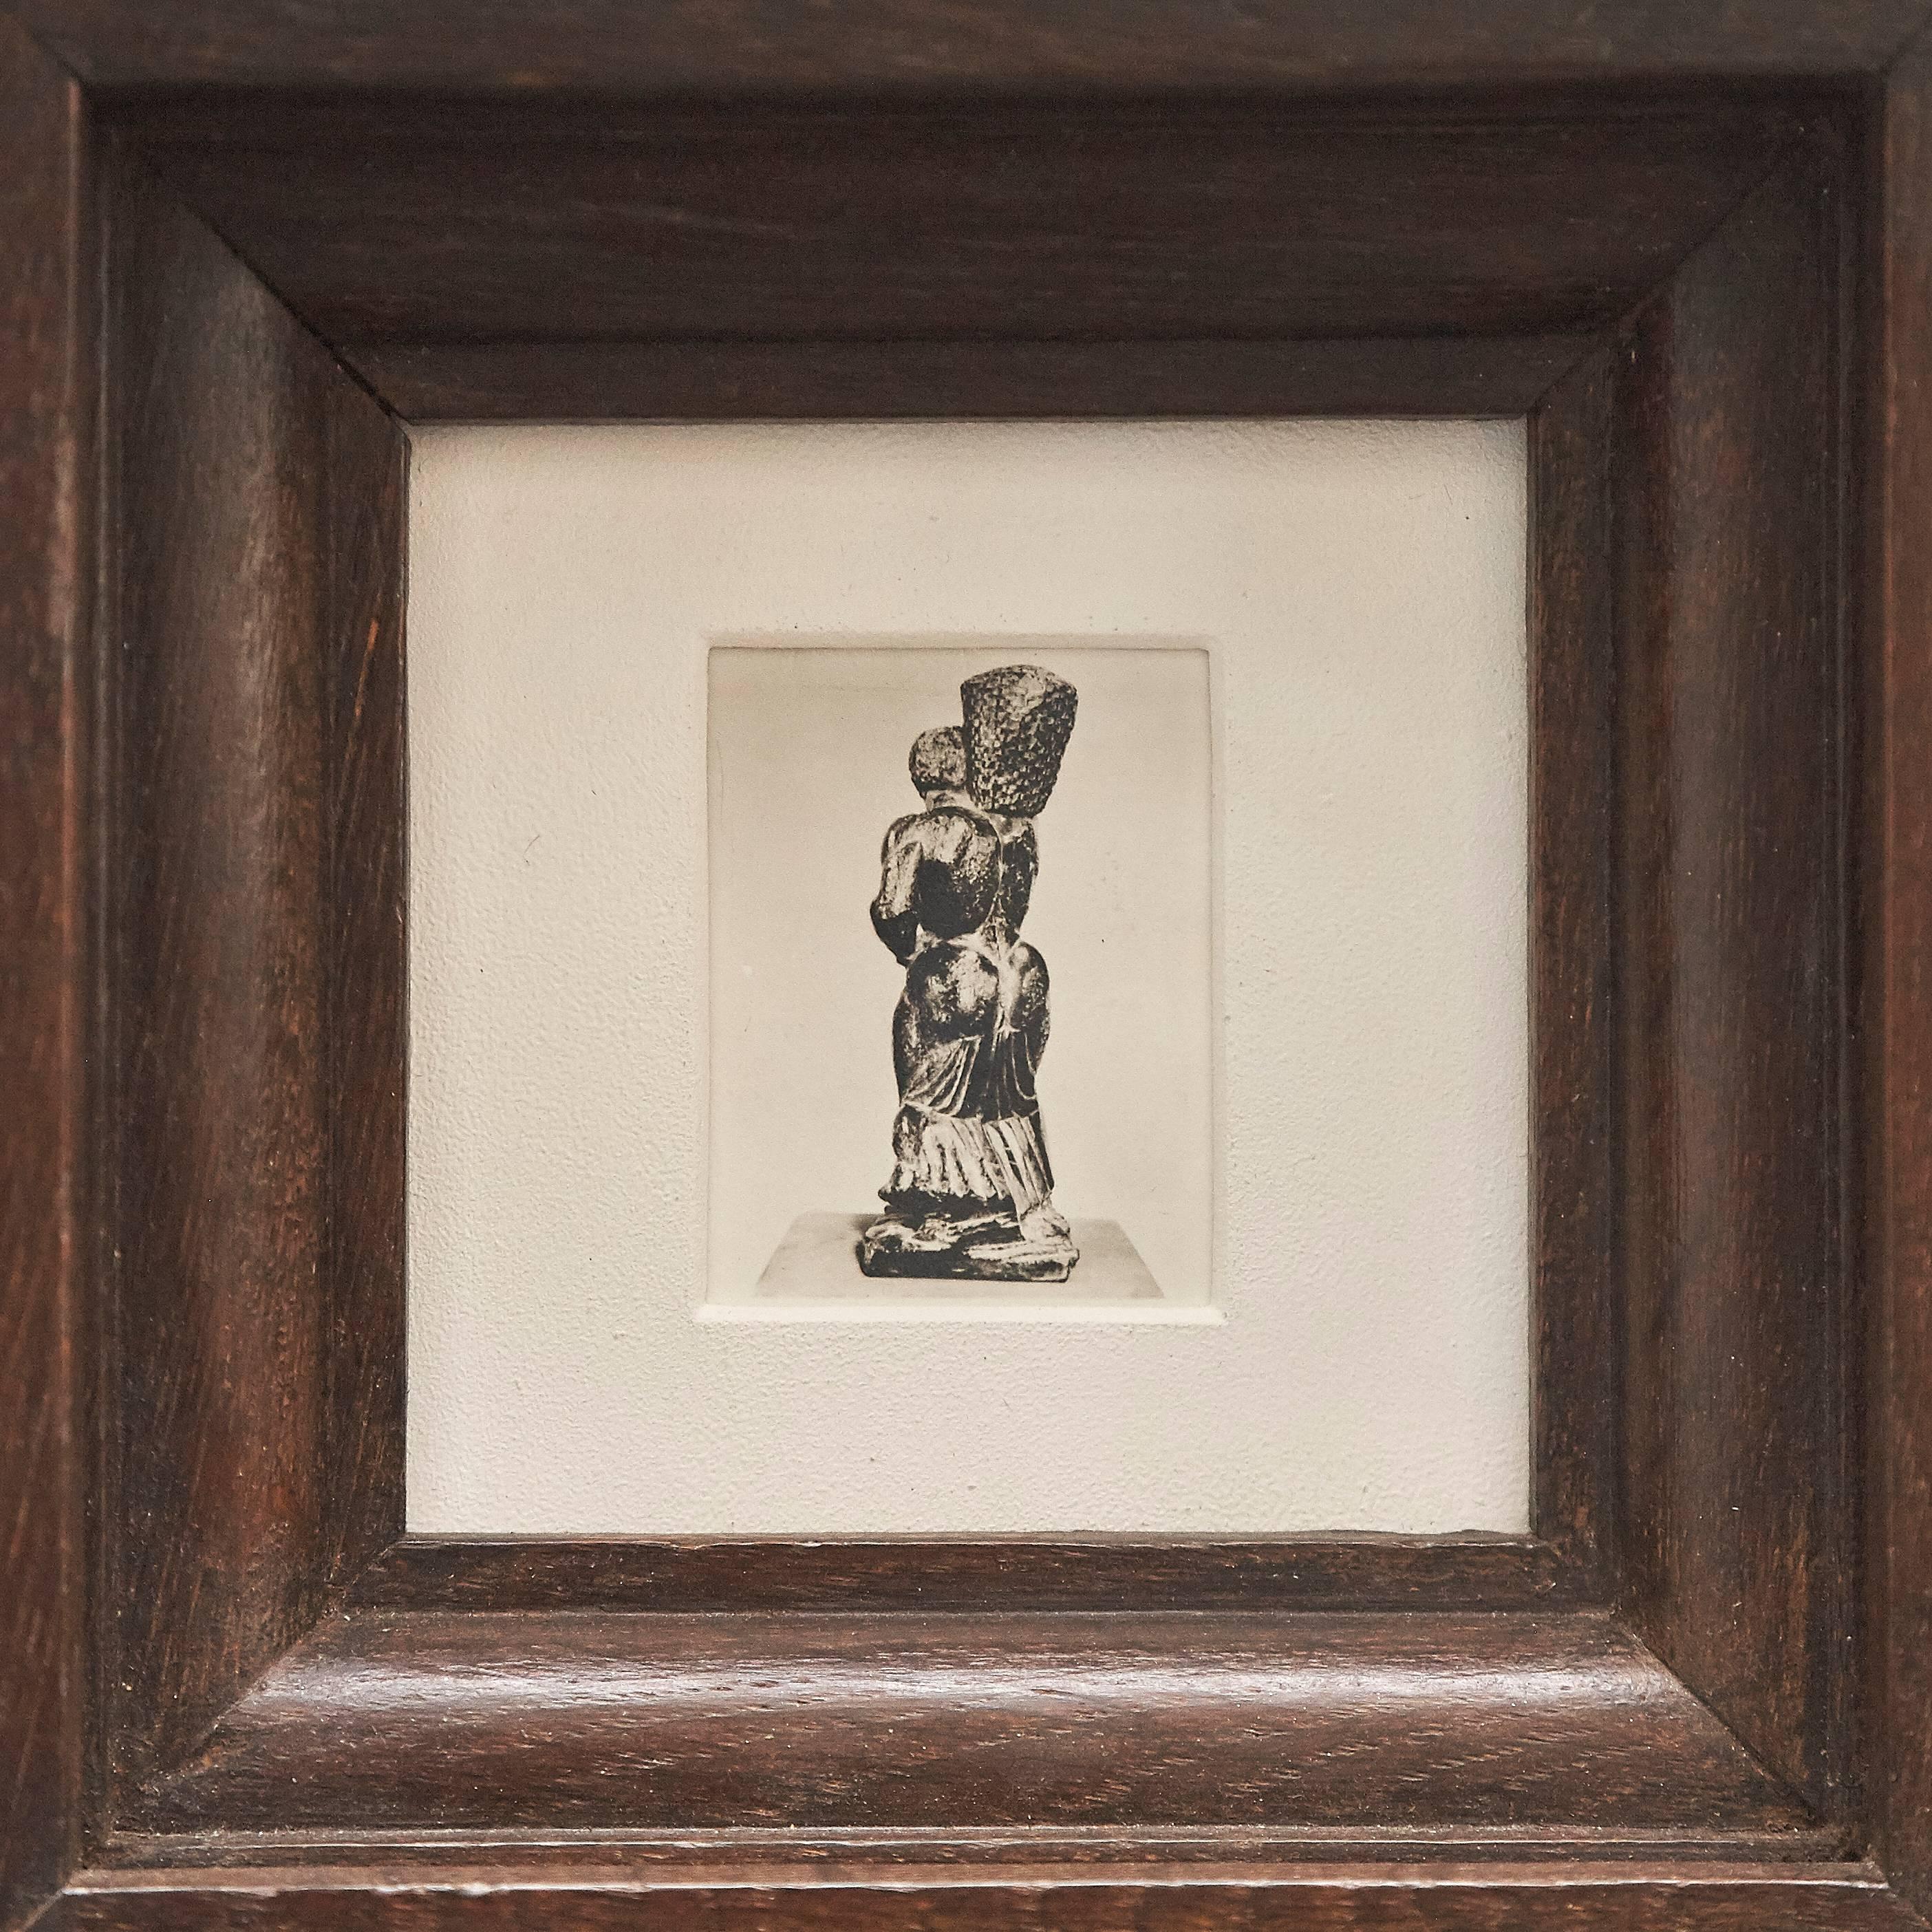 Manolo Hugué archive photography of sculpture.
Printed, circa 1960.
Framed on a 19th century frame with museum glass.

Gelatin silver bromide print.

We offer free worldwide shipping for this piece.